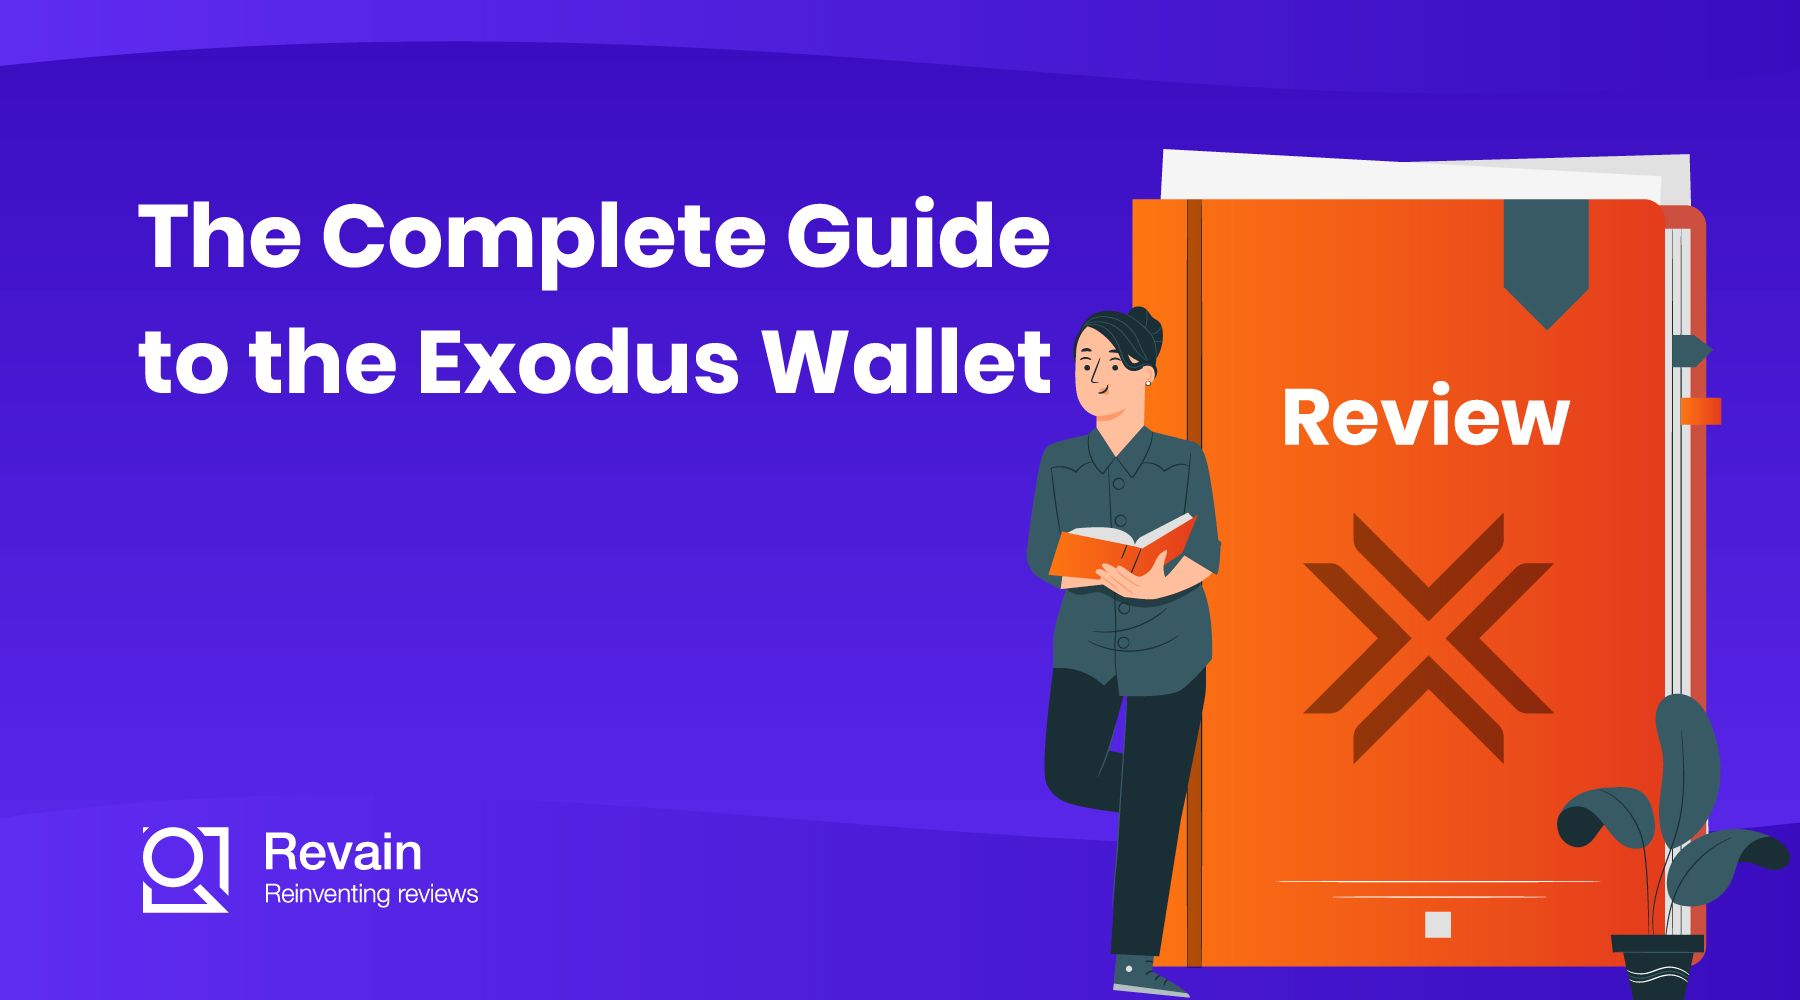 Article The Complete Guide to the Exodus Wallet